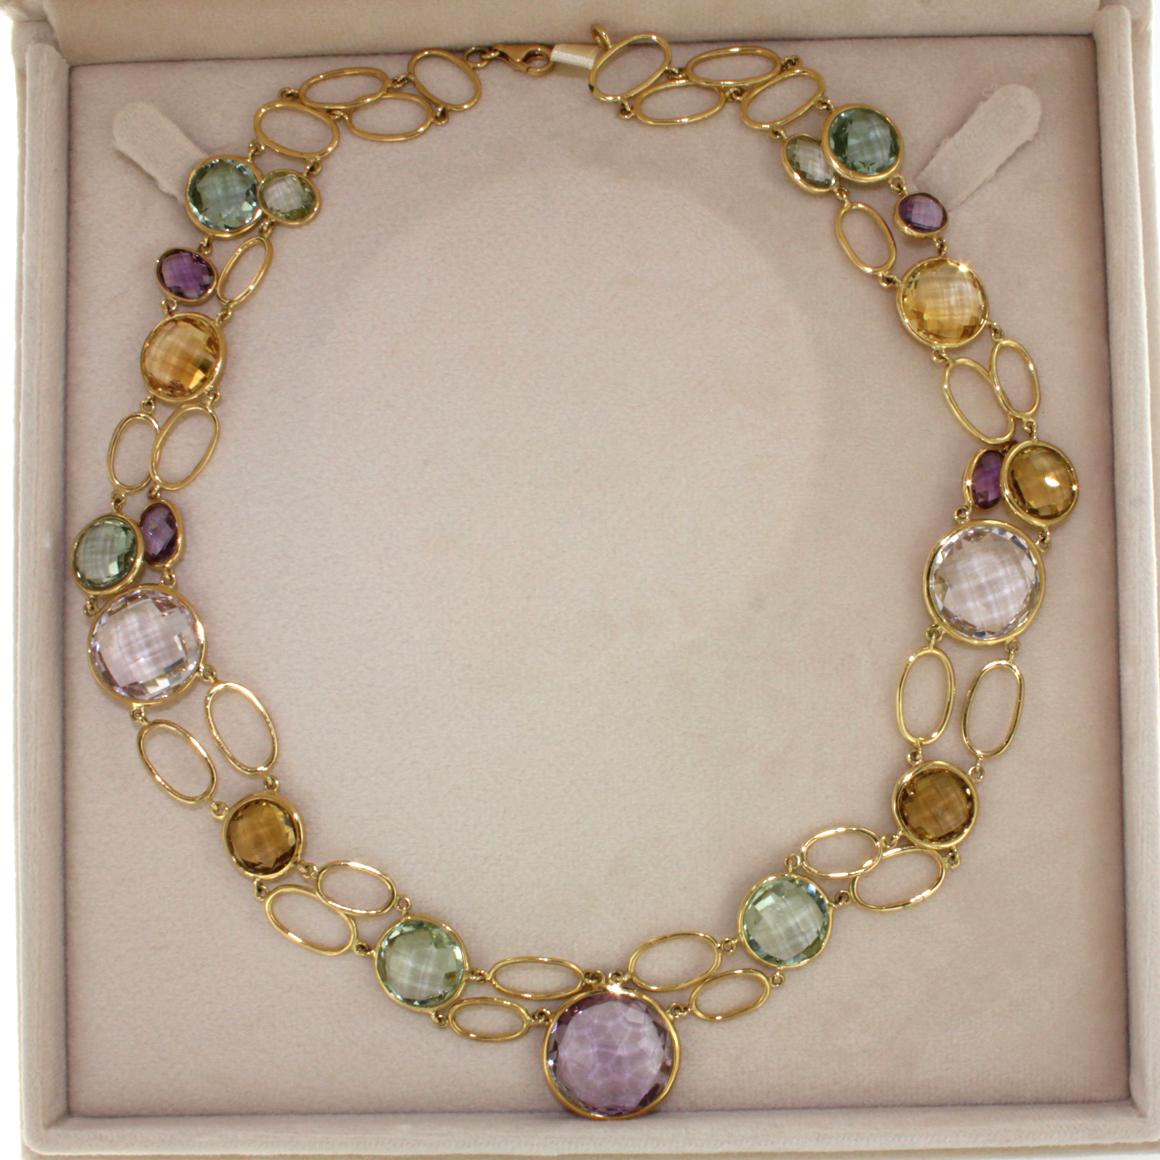 Women's or Men's 18k Yellow Gold with Colored Stones Bracelet and Necklace Set For Sale